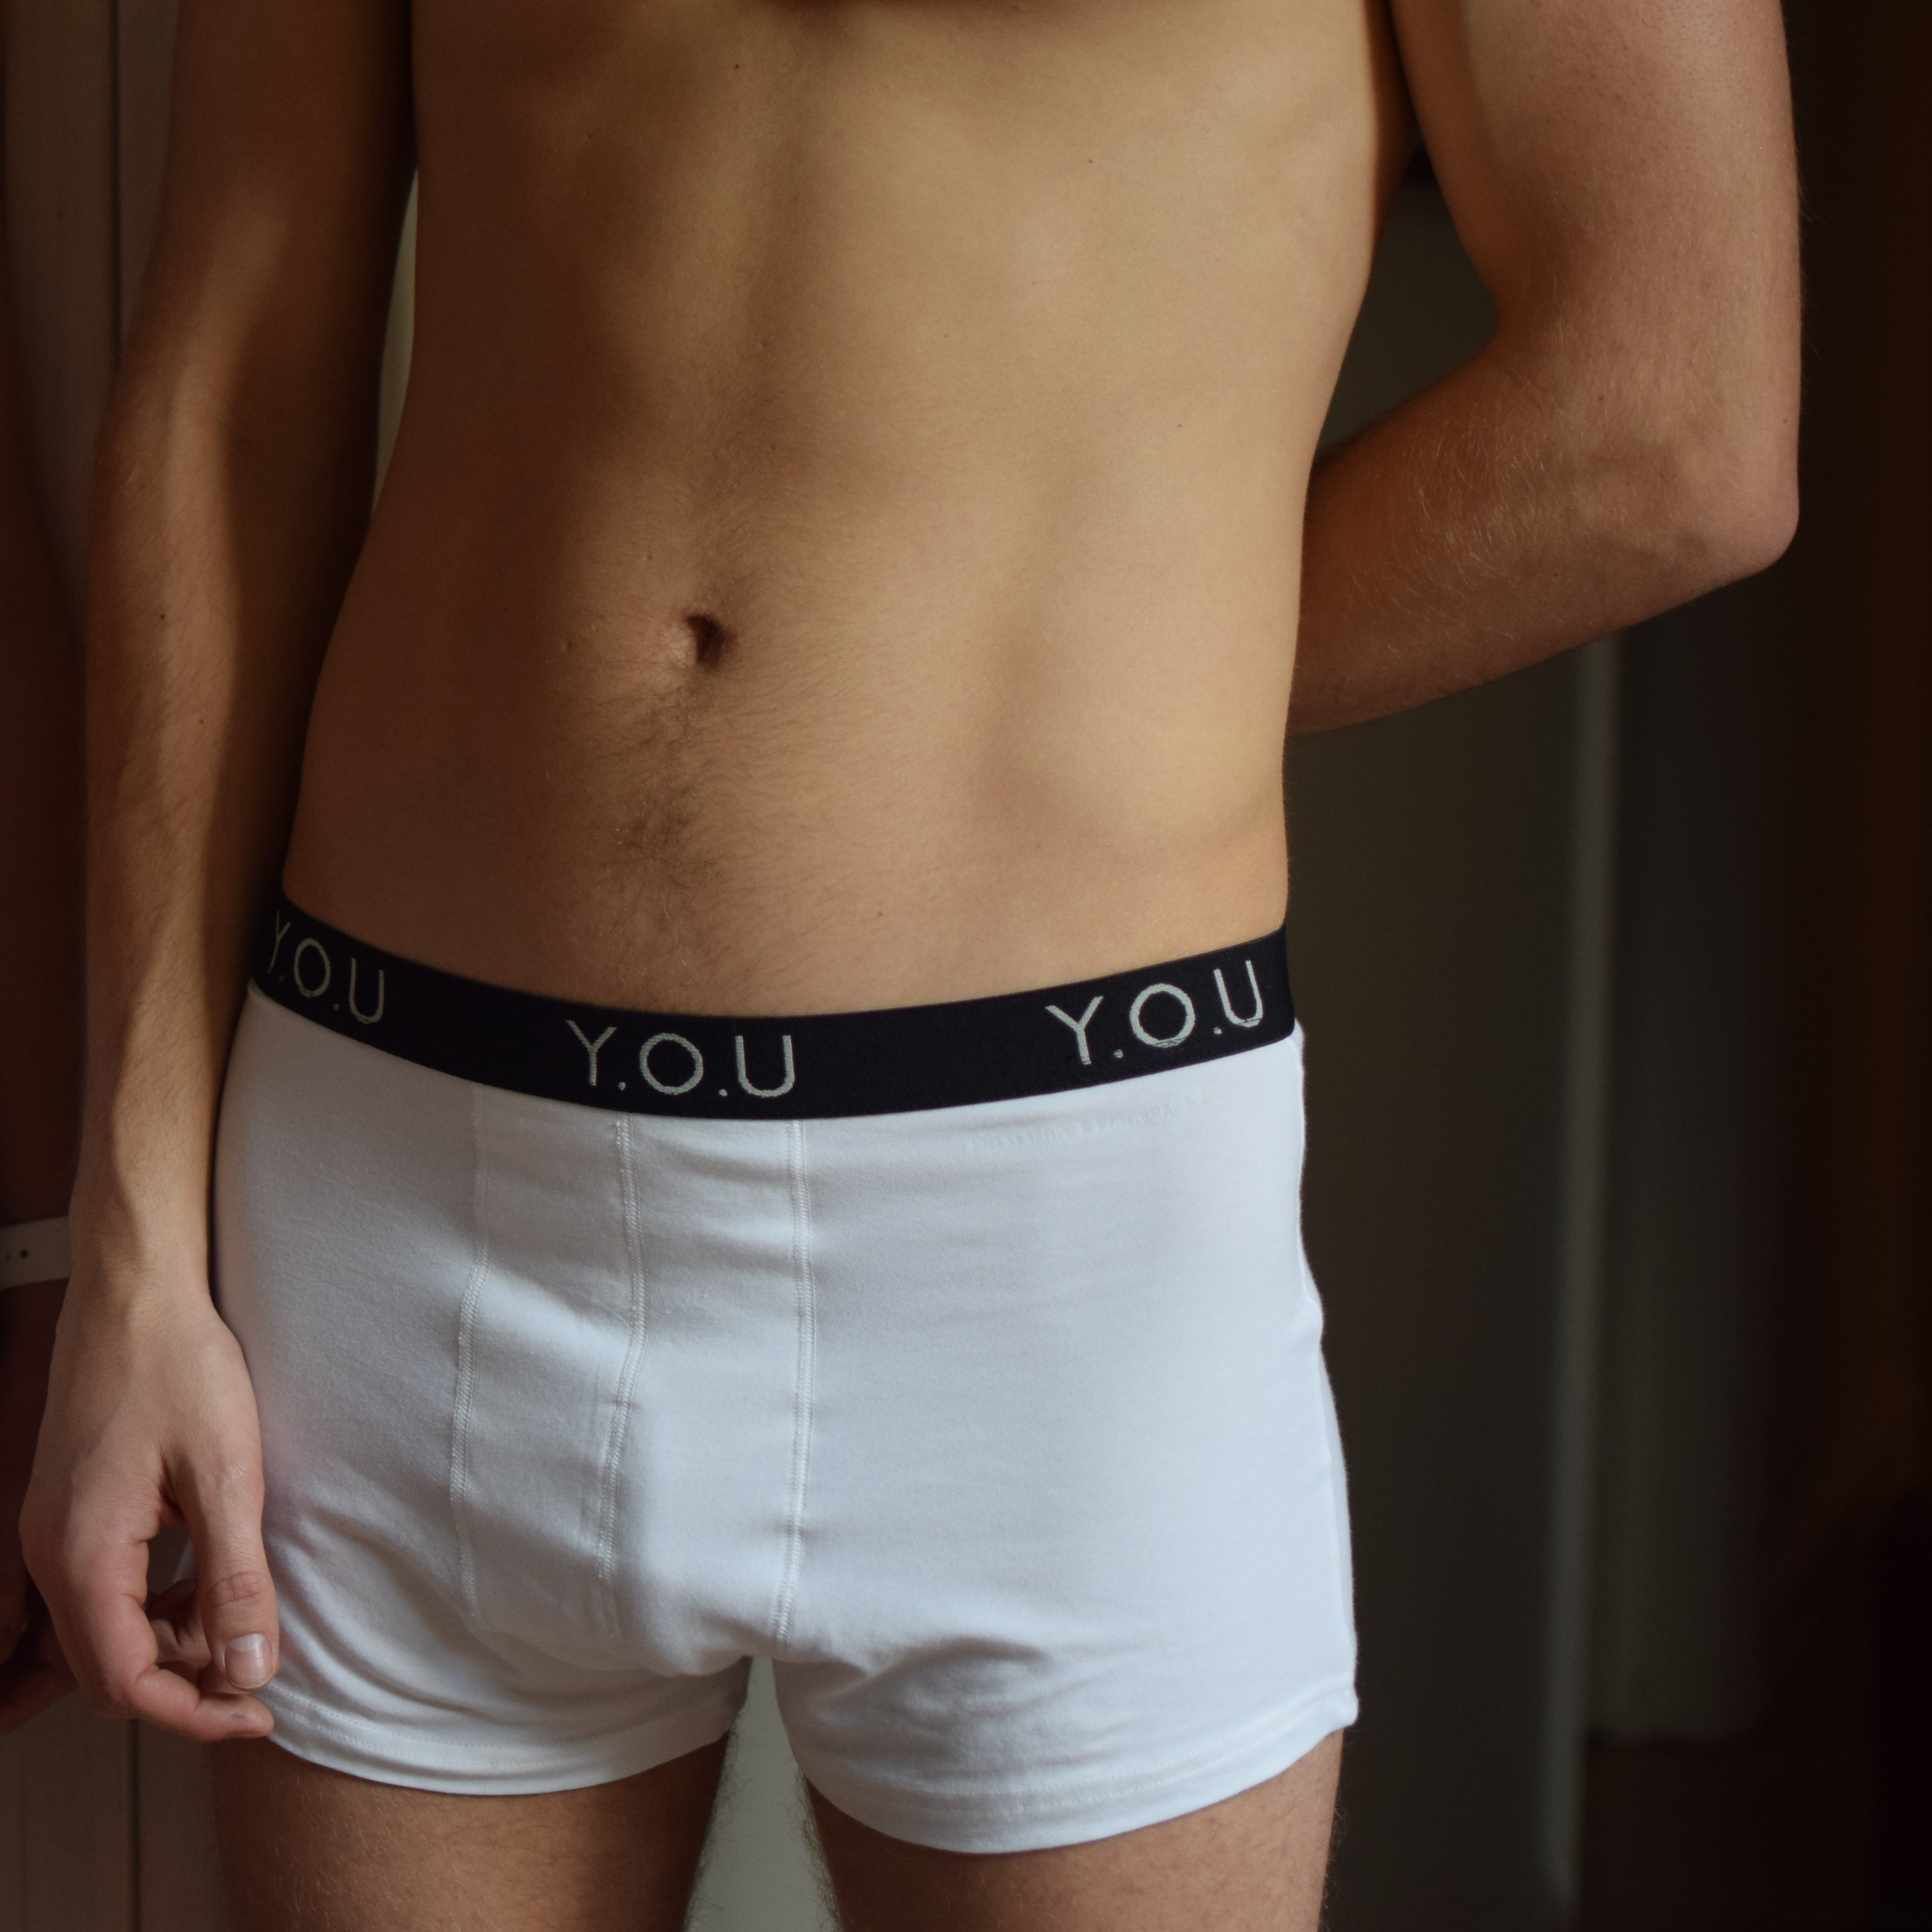 A person is pictured from the neck to the thighs, wearing white men's hipster trunks with a black waistband that has "Y.O.U" printed on it. The individual's hands are hanging naturally by their sides, and the background is slightly blurred.